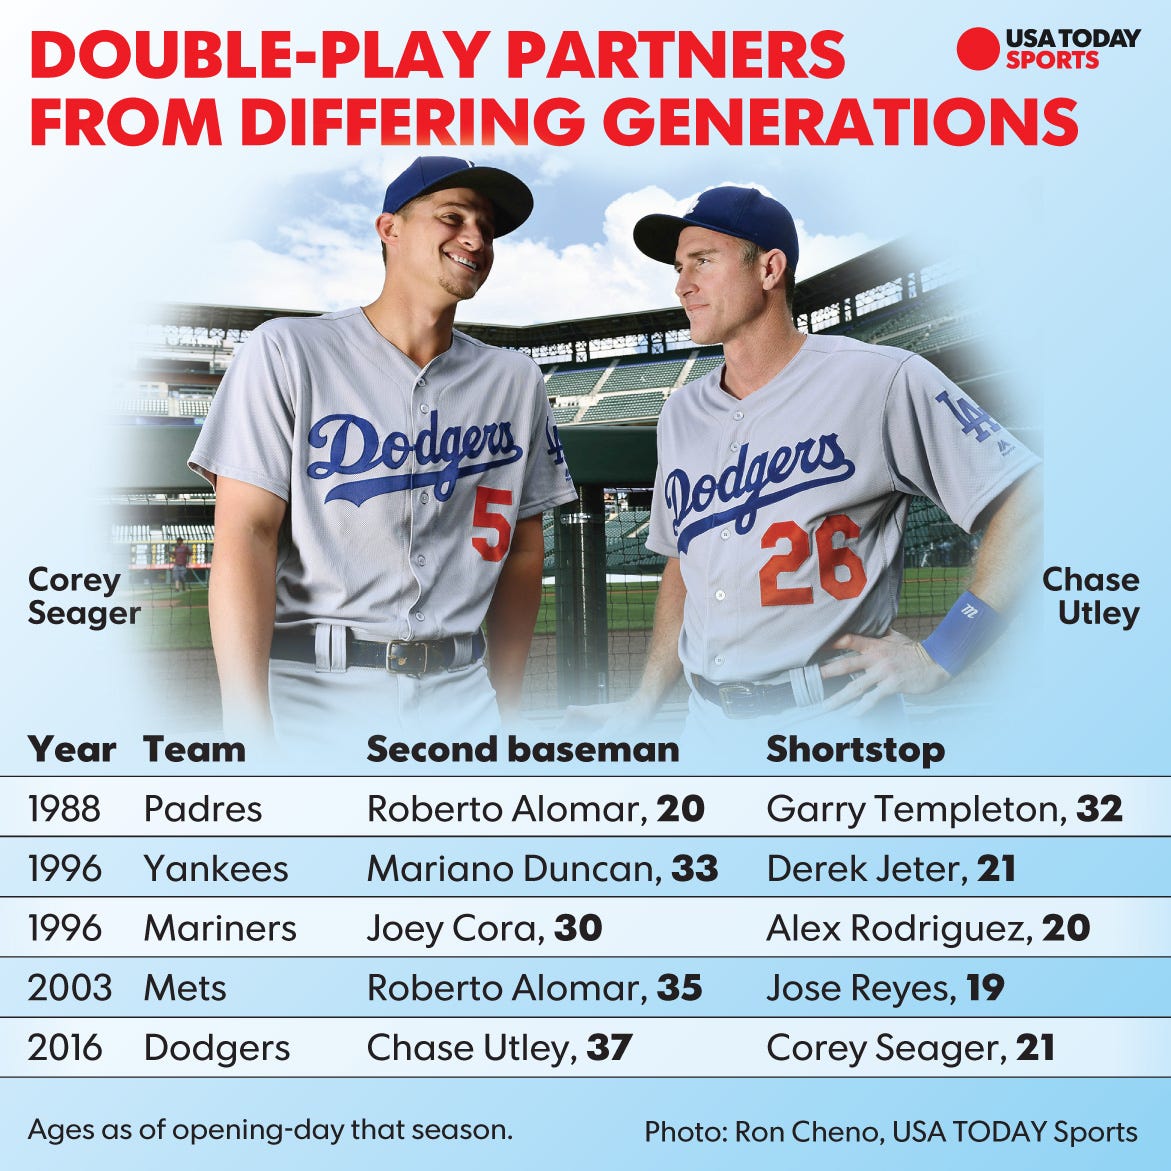 Dodgers' Chase Utley loses bet to Corey Seager, dyes his hair